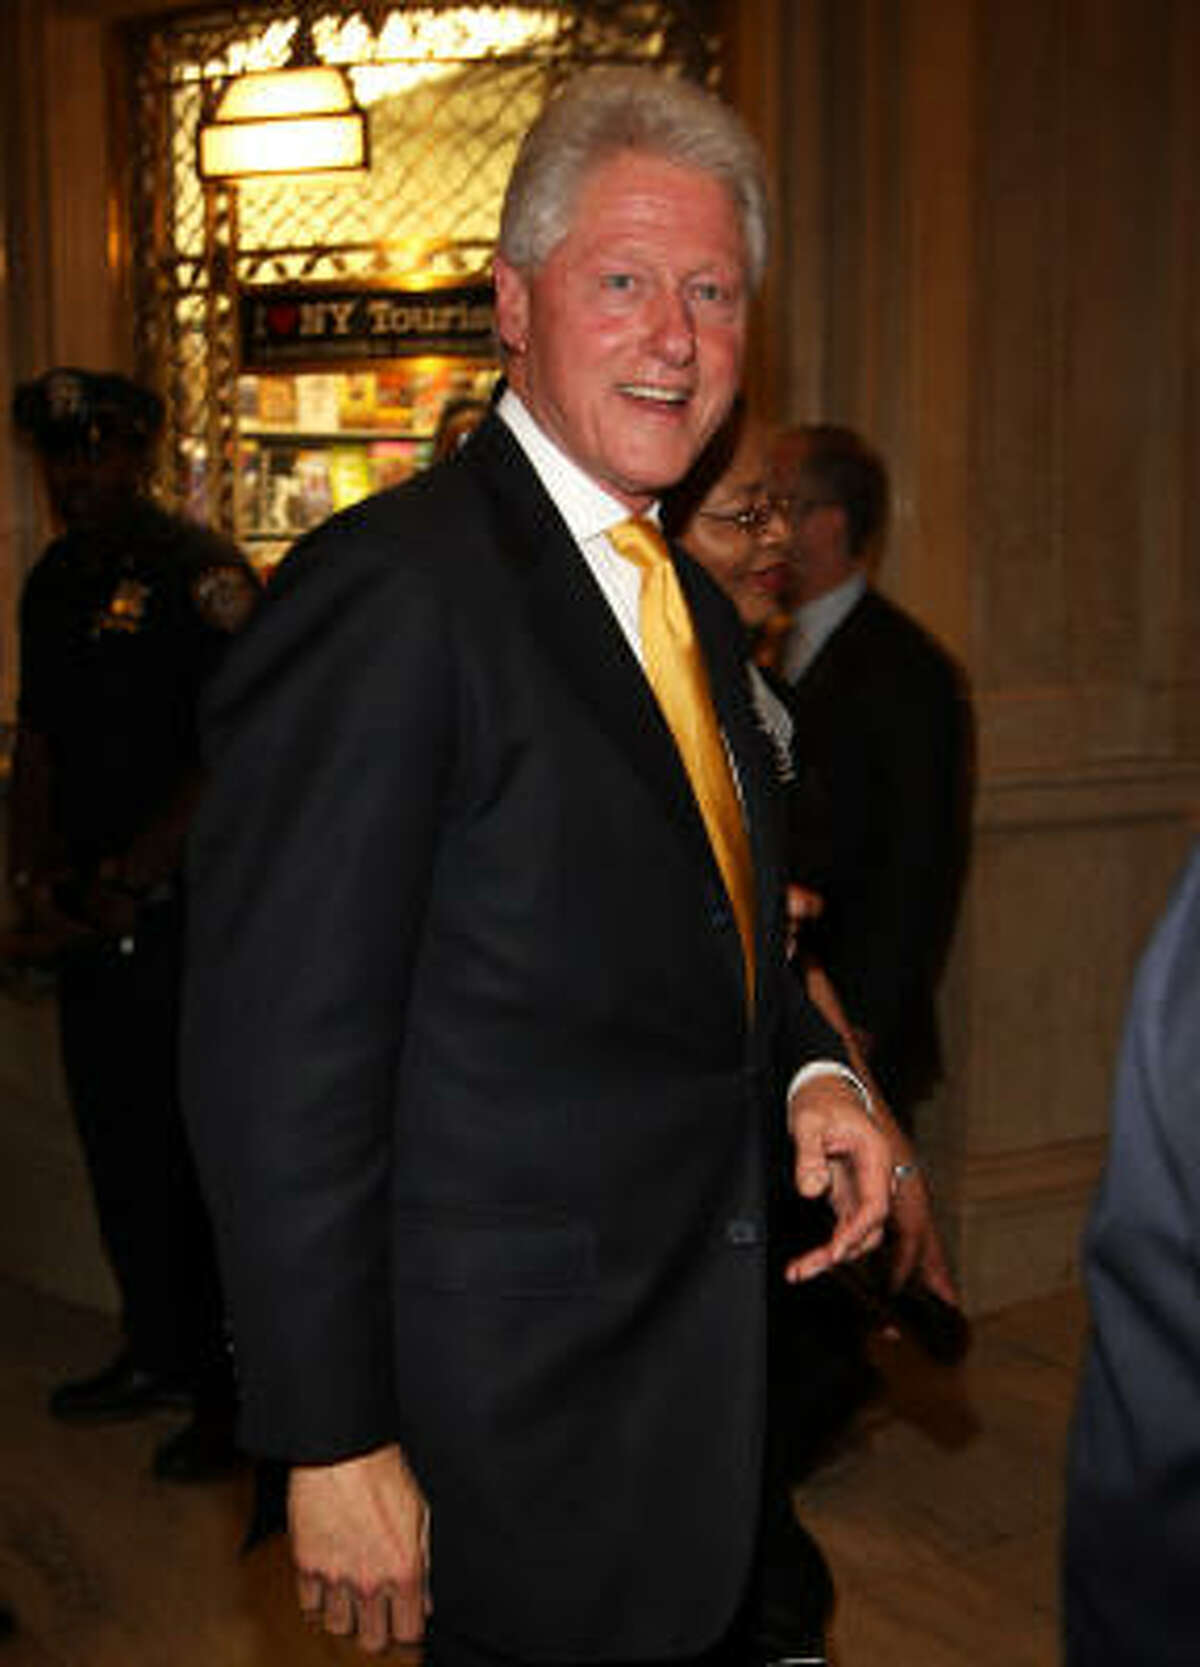 Bill Clinton went from the most hated husband in America to being the apple of democrats' eyes again.